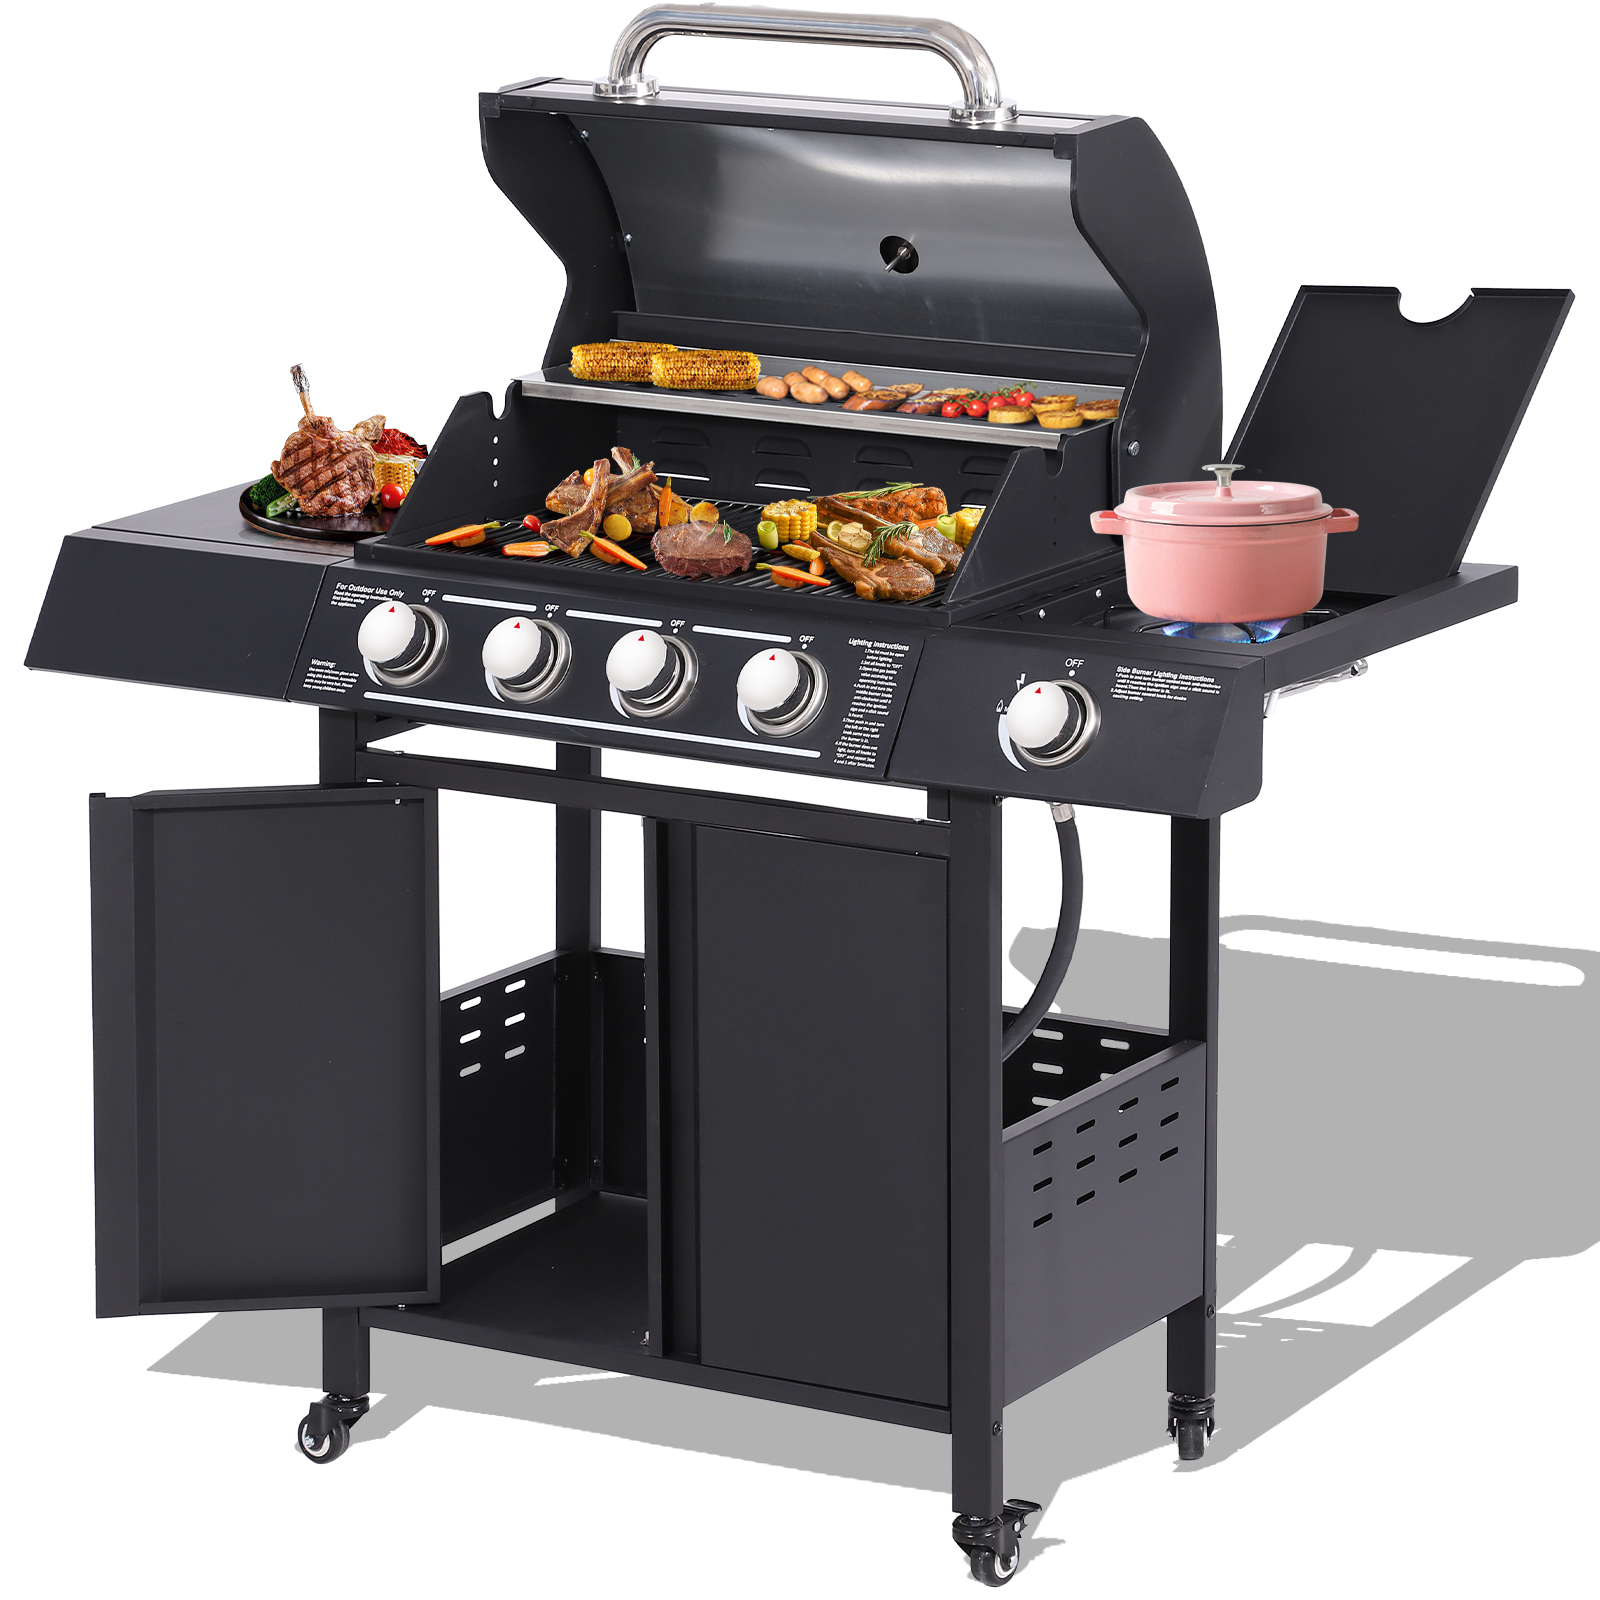 Haverchair 4-Burner Propane Gas Grill with Side Burner and Stainless Steel Grates 50,000 BTU Outdoor Cooking BBQ Grills Cart,Black - image 1 of 9